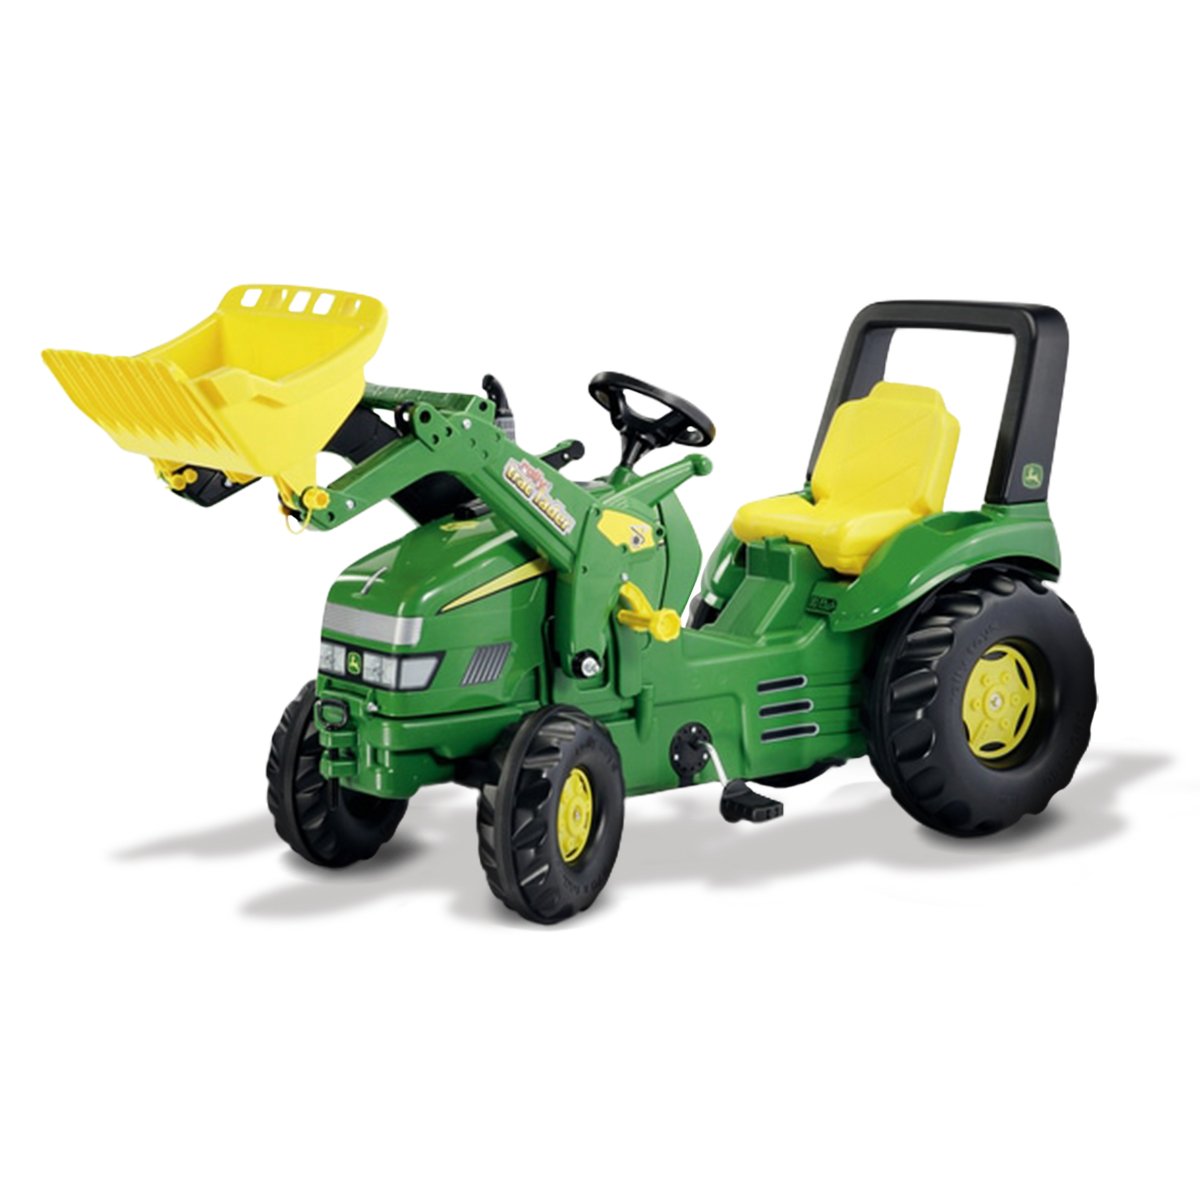 John Deere Kids Premium Ride on Tractor with Maxi Loader RT046638 2